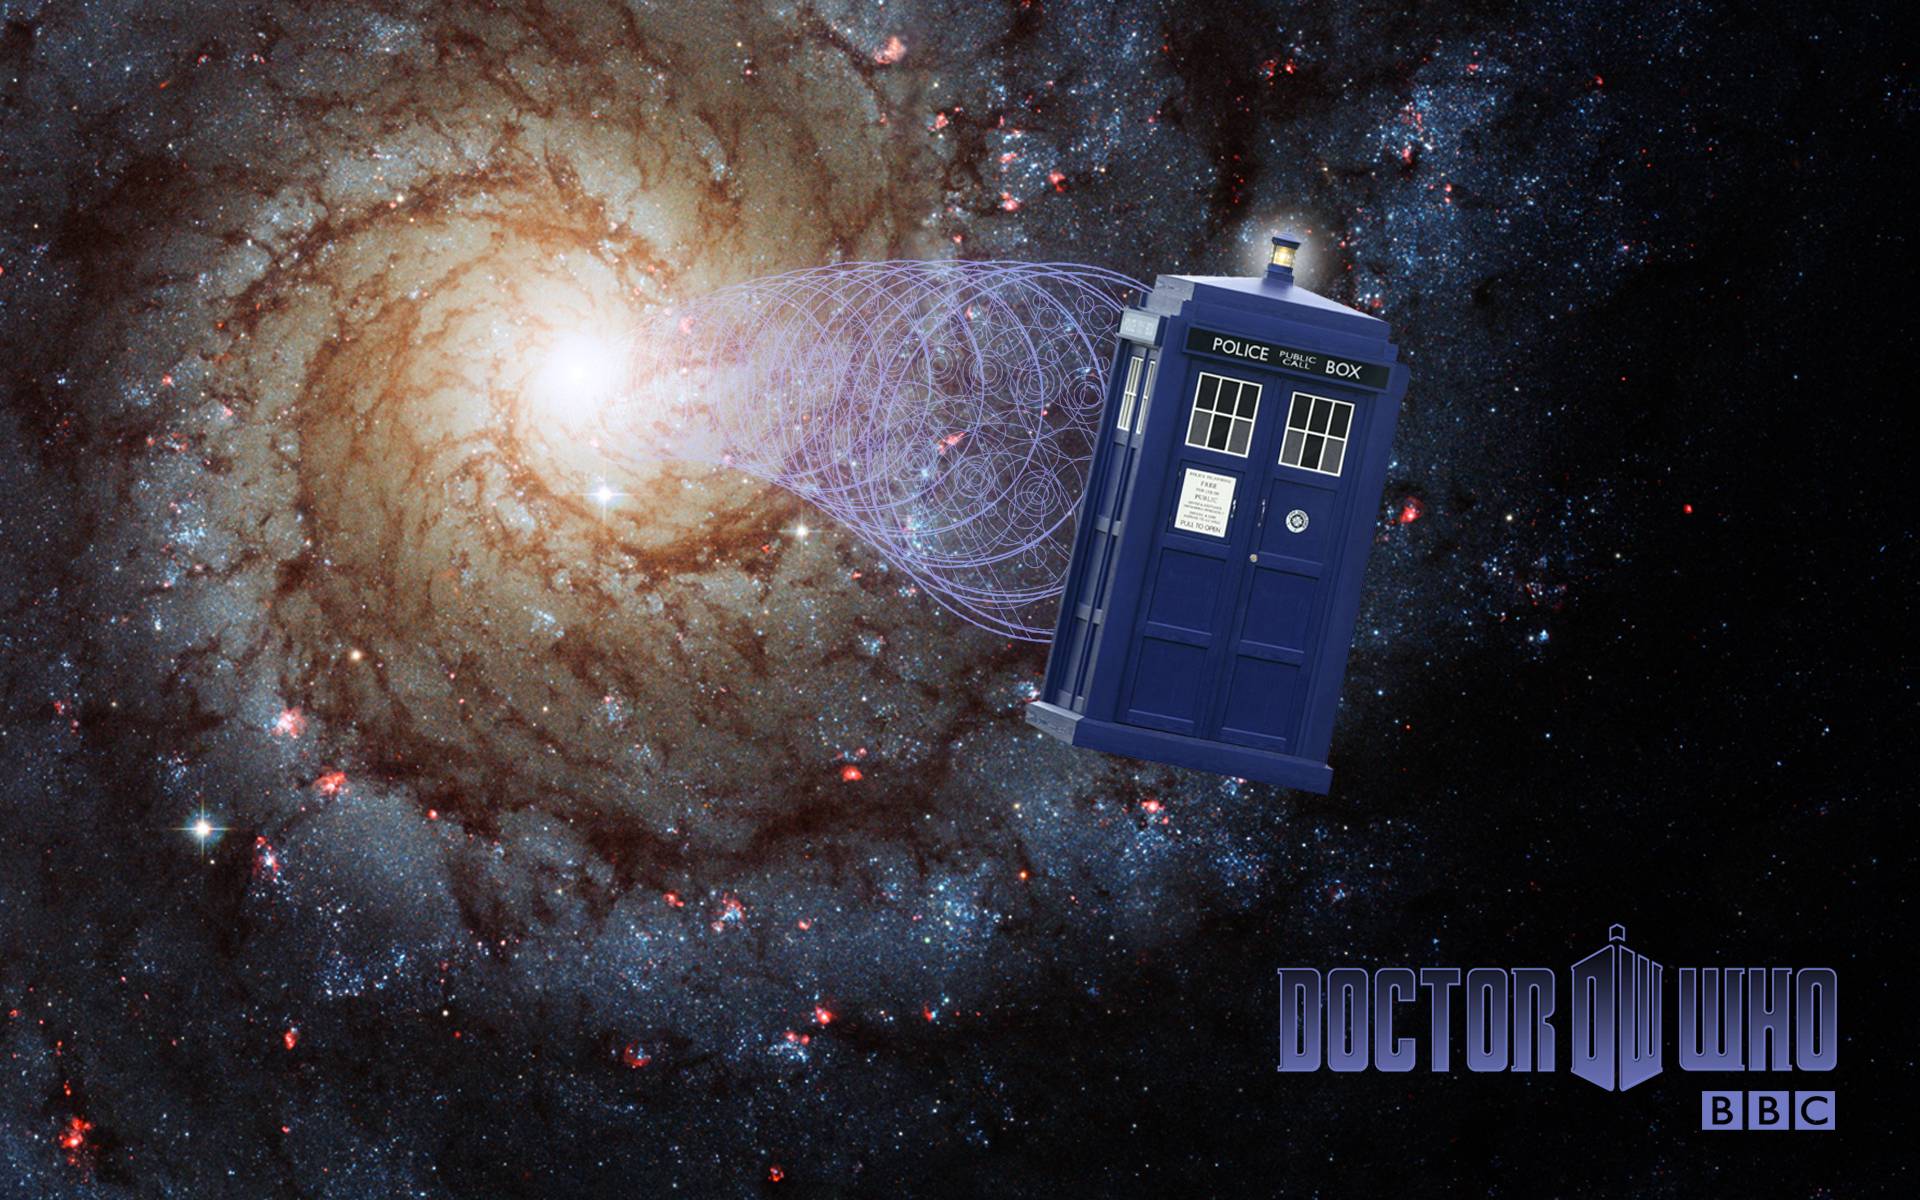 Doctor Who Wallpaper Tardis Doctor Who Wallpaper HD Free